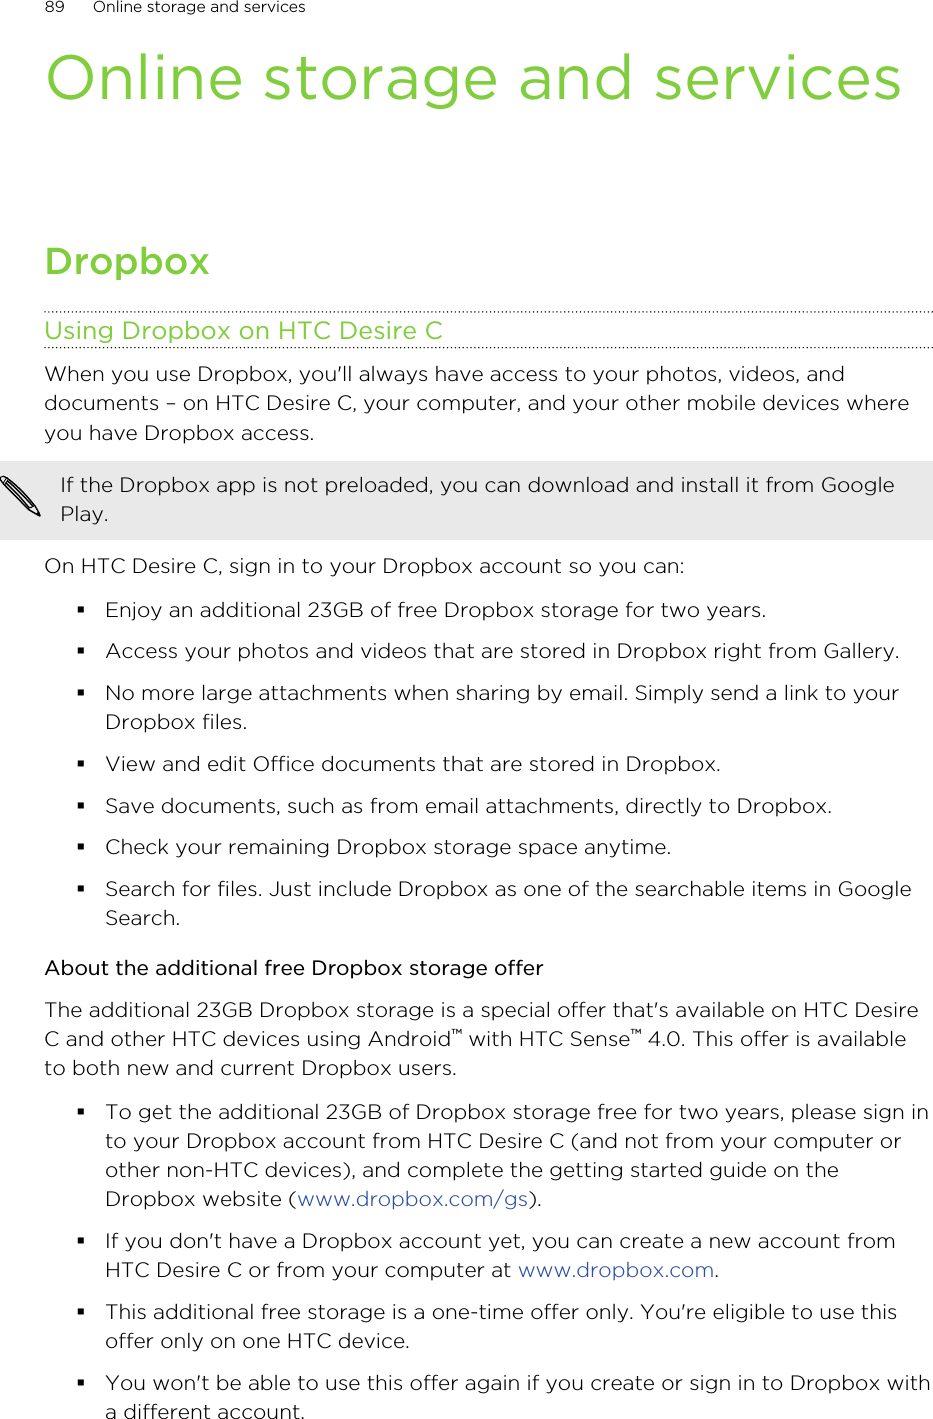 Online storage and servicesDropboxUsing Dropbox on HTC Desire CWhen you use Dropbox, you&apos;ll always have access to your photos, videos, anddocuments – on HTC Desire C, your computer, and your other mobile devices whereyou have Dropbox access.If the Dropbox app is not preloaded, you can download and install it from GooglePlay.On HTC Desire C, sign in to your Dropbox account so you can:§Enjoy an additional 23GB of free Dropbox storage for two years.§Access your photos and videos that are stored in Dropbox right from Gallery.§No more large attachments when sharing by email. Simply send a link to yourDropbox files.§View and edit Office documents that are stored in Dropbox.§Save documents, such as from email attachments, directly to Dropbox.§Check your remaining Dropbox storage space anytime.§Search for files. Just include Dropbox as one of the searchable items in GoogleSearch.About the additional free Dropbox storage offerThe additional 23GB Dropbox storage is a special offer that&apos;s available on HTC DesireC and other HTC devices using Android™ with HTC Sense™ 4.0. This offer is availableto both new and current Dropbox users.§To get the additional 23GB of Dropbox storage free for two years, please sign into your Dropbox account from HTC Desire C (and not from your computer orother non-HTC devices), and complete the getting started guide on theDropbox website (www.dropbox.com/gs).§If you don&apos;t have a Dropbox account yet, you can create a new account fromHTC Desire C or from your computer at www.dropbox.com.§This additional free storage is a one-time offer only. You&apos;re eligible to use thisoffer only on one HTC device.§You won&apos;t be able to use this offer again if you create or sign in to Dropbox witha different account.89 Online storage and services